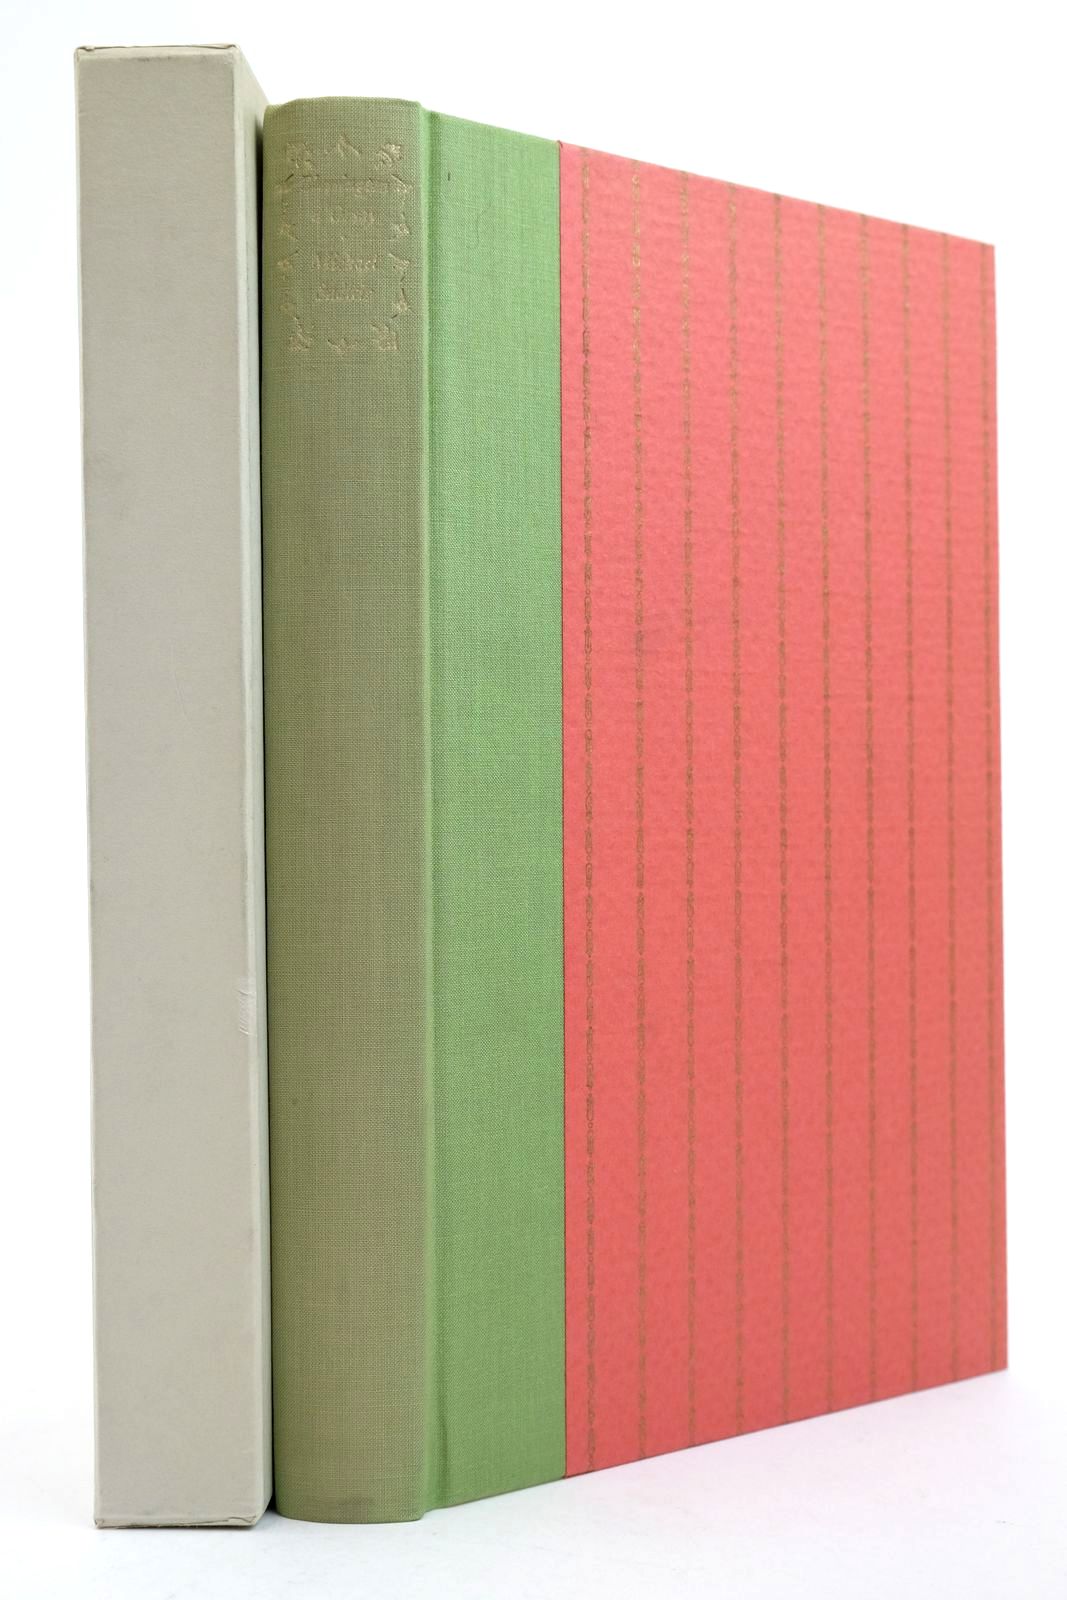 Photo of BLESSINGTON-D'ORSAY: A MASQUERADE written by Sadleir, Michael published by Folio Society (STOCK CODE: 2138955)  for sale by Stella & Rose's Books